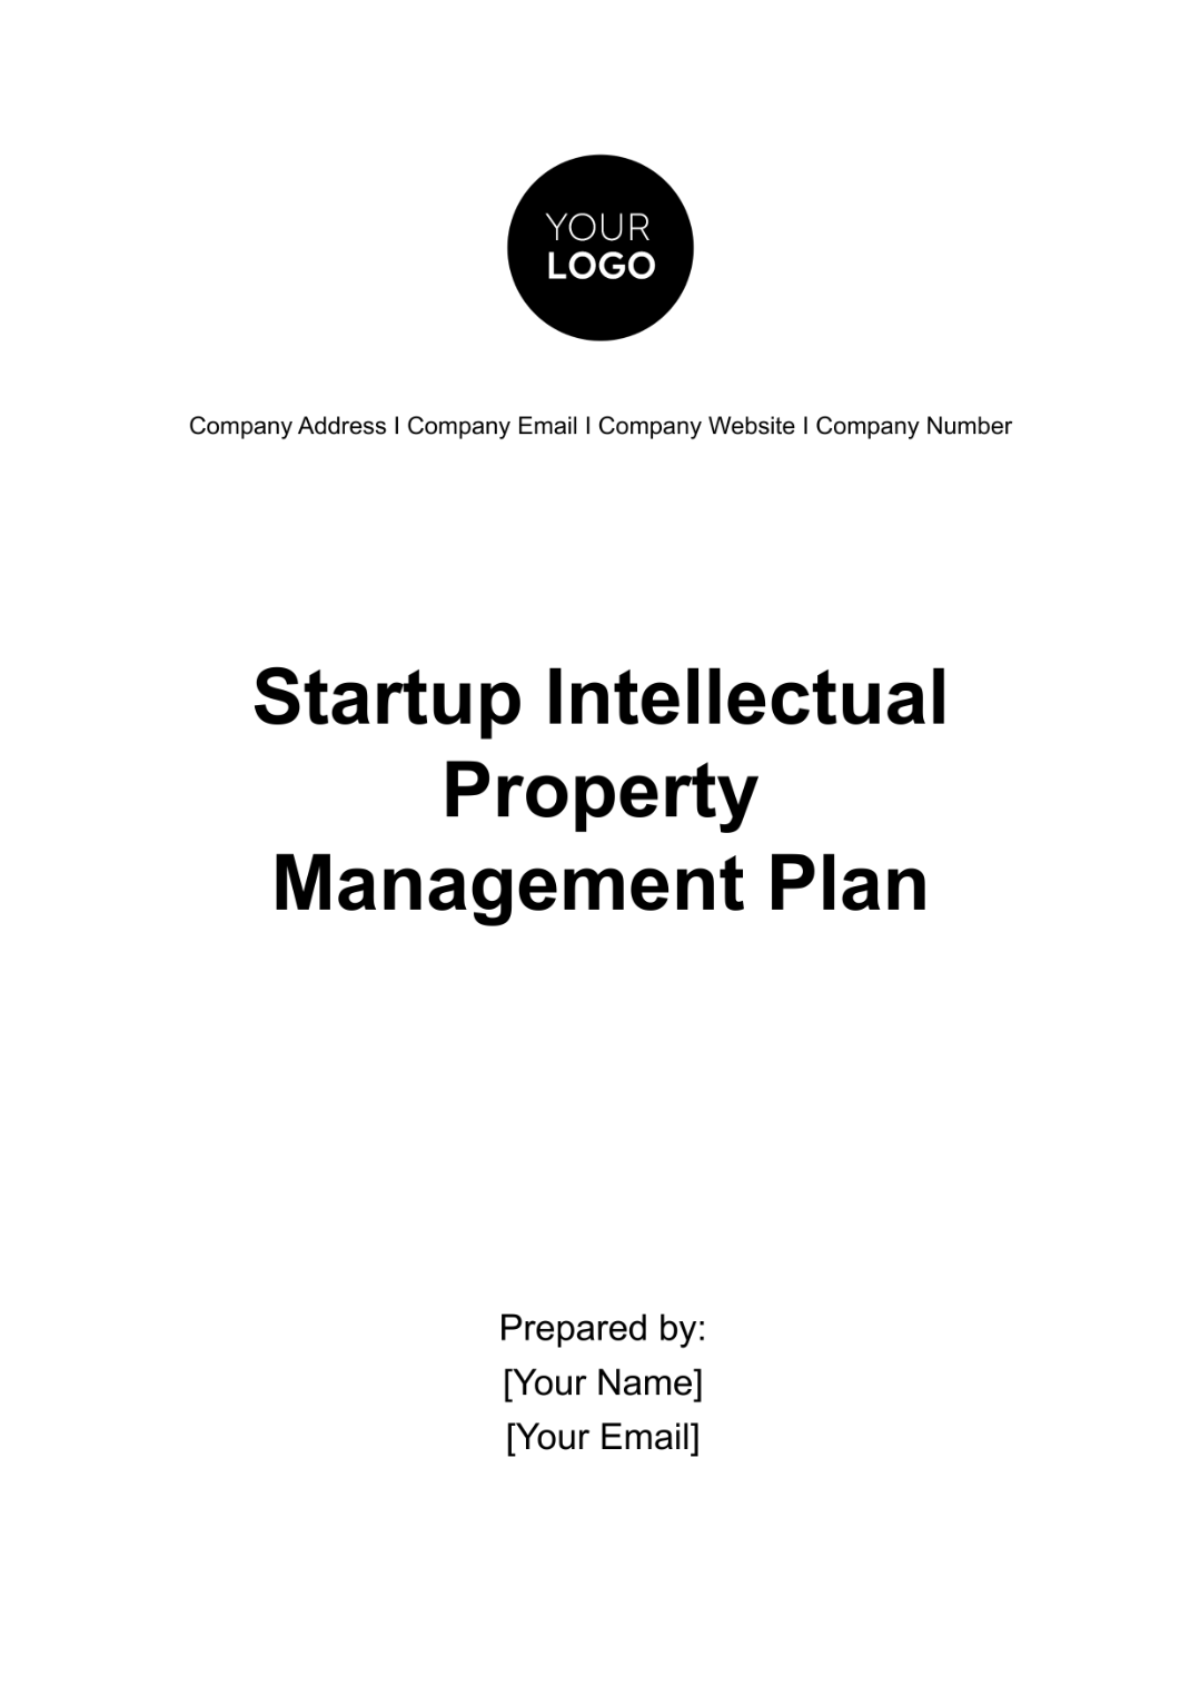 Startup Intellectual Property Management Plan Template